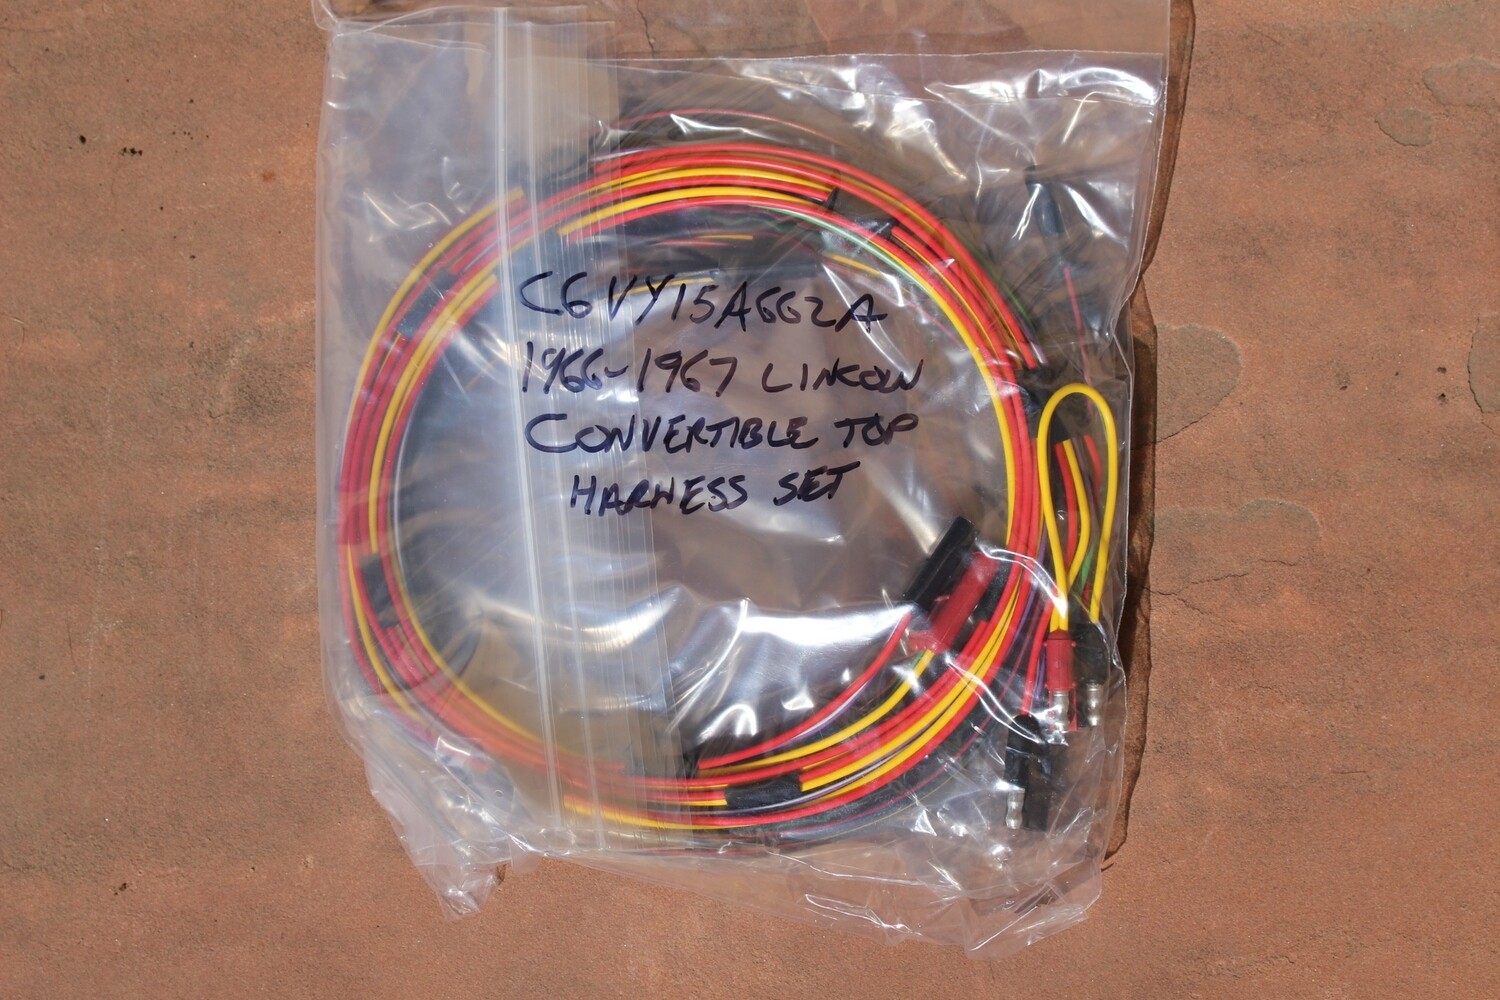 1966 1967 Lincoln Convertible Top Wiring Harness Set NEW C6VY-15B662-P